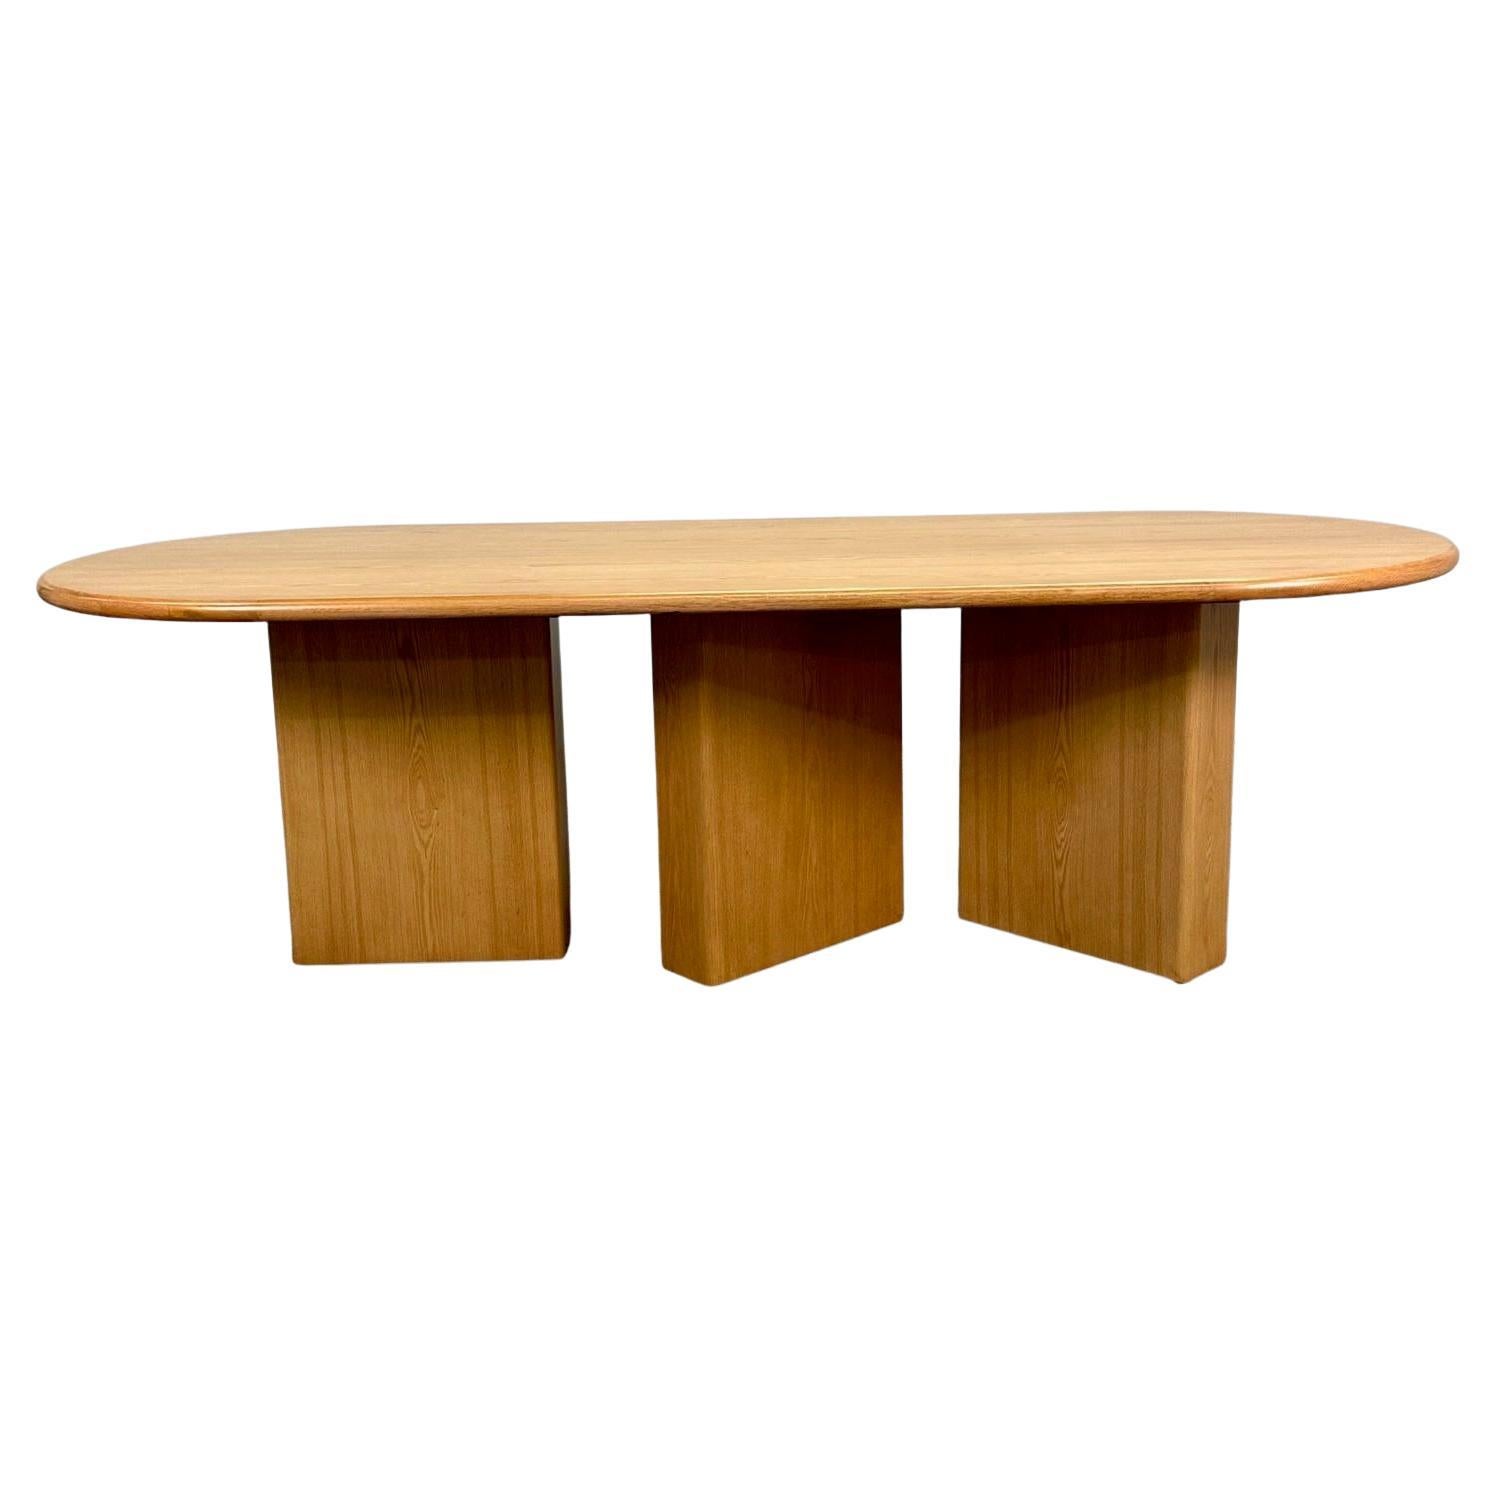 Contemporary Handcrafted Oval Dining Table, Solid Oak, Modern Pedestal Base For Sale